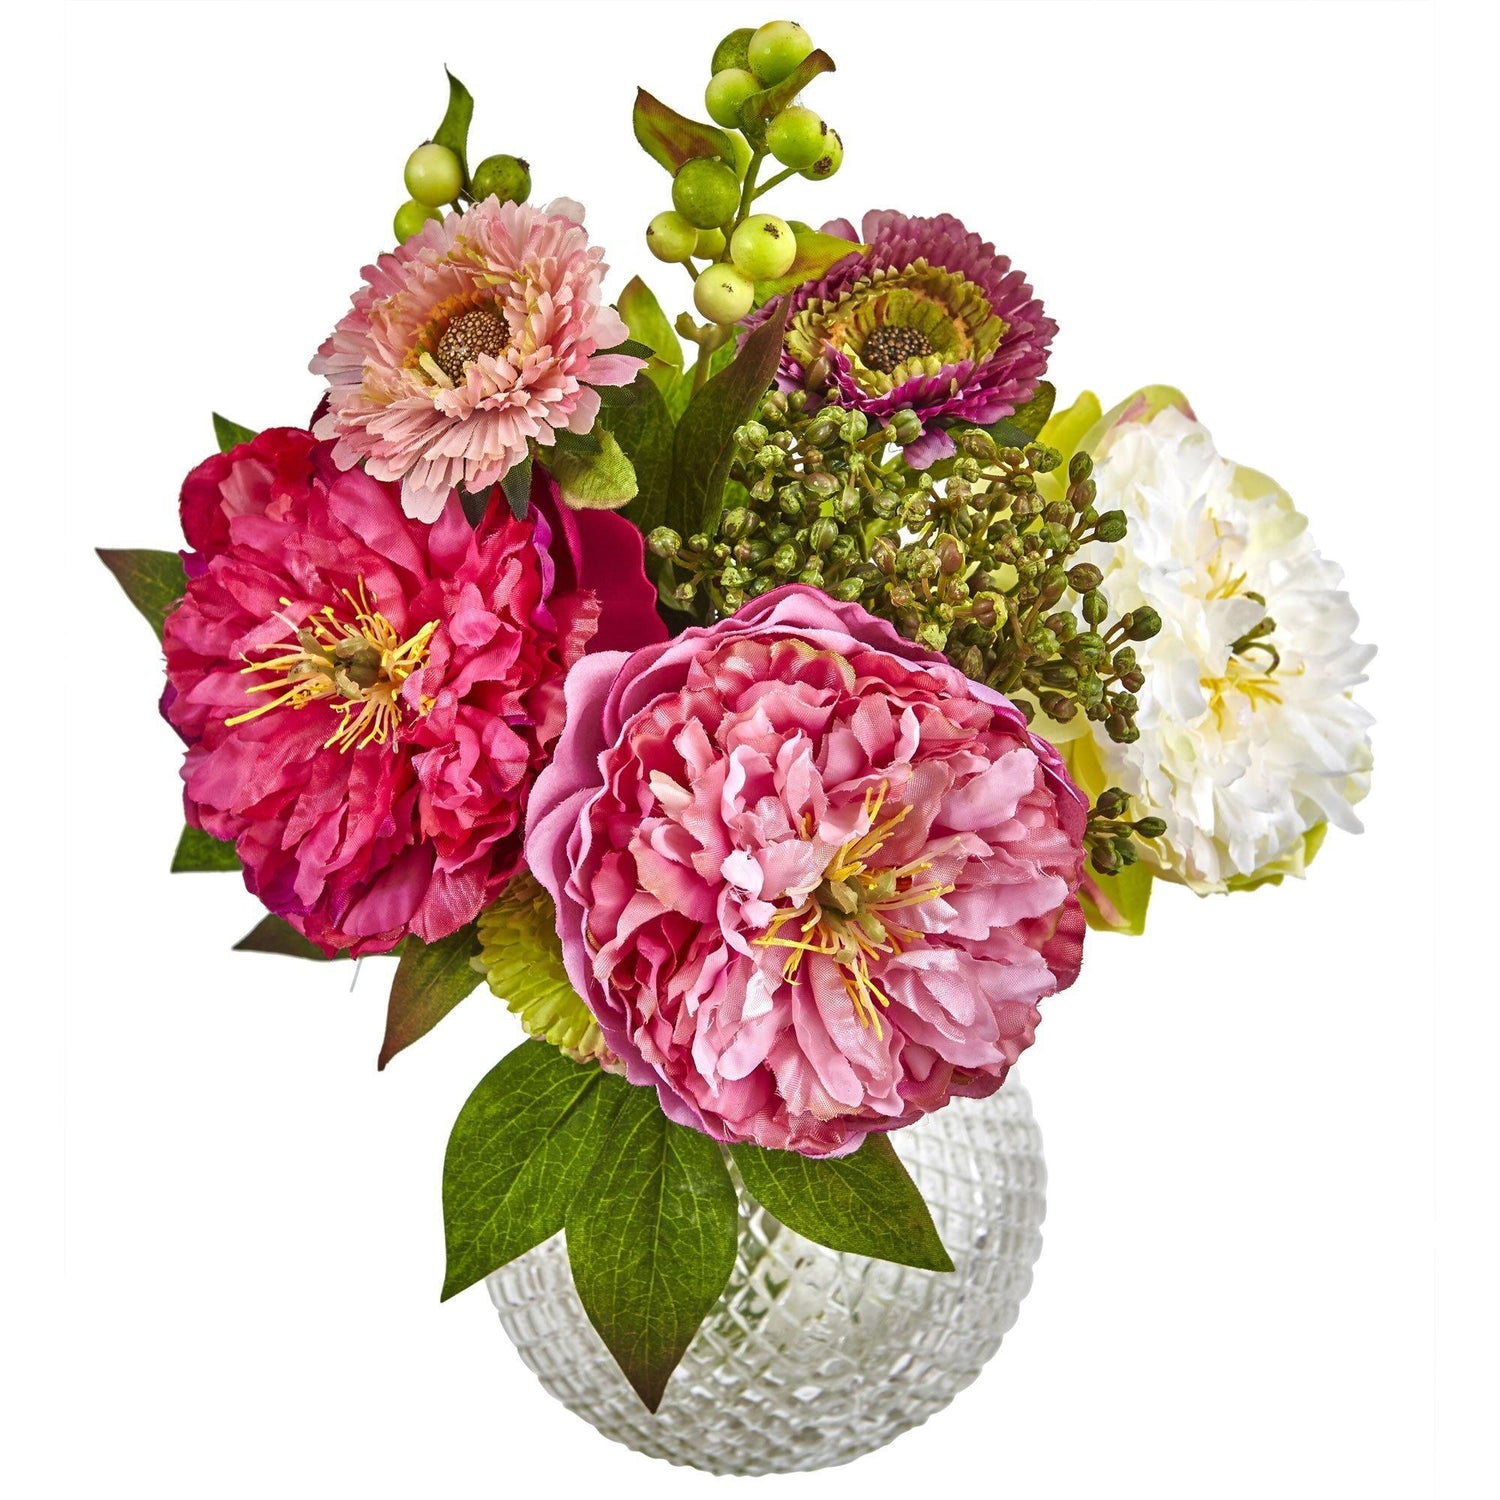 14" Artificial Peony and Mum in Glass Vase"